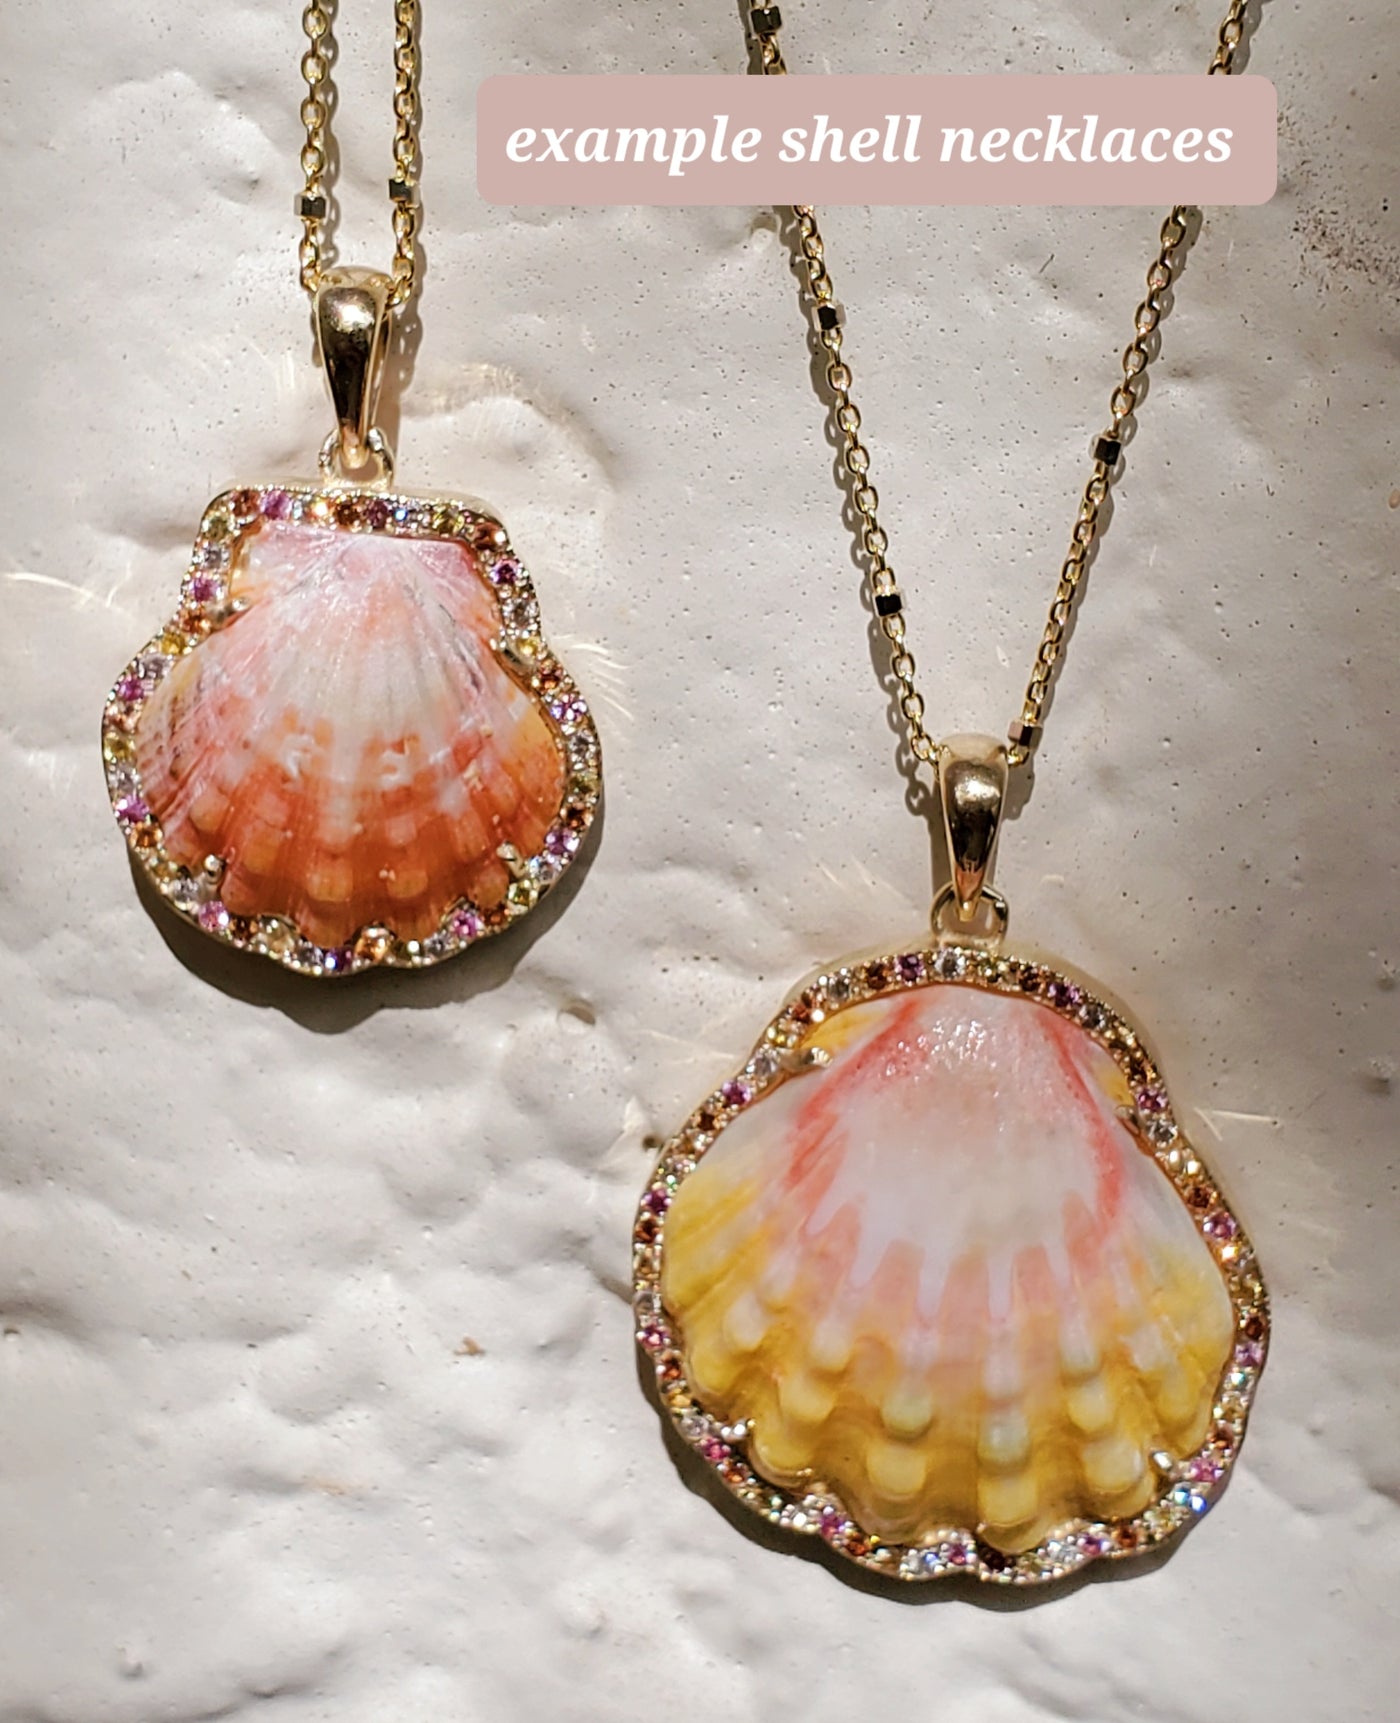 Pre - Order Enchanted Sunrise Shell Necklace  * Small